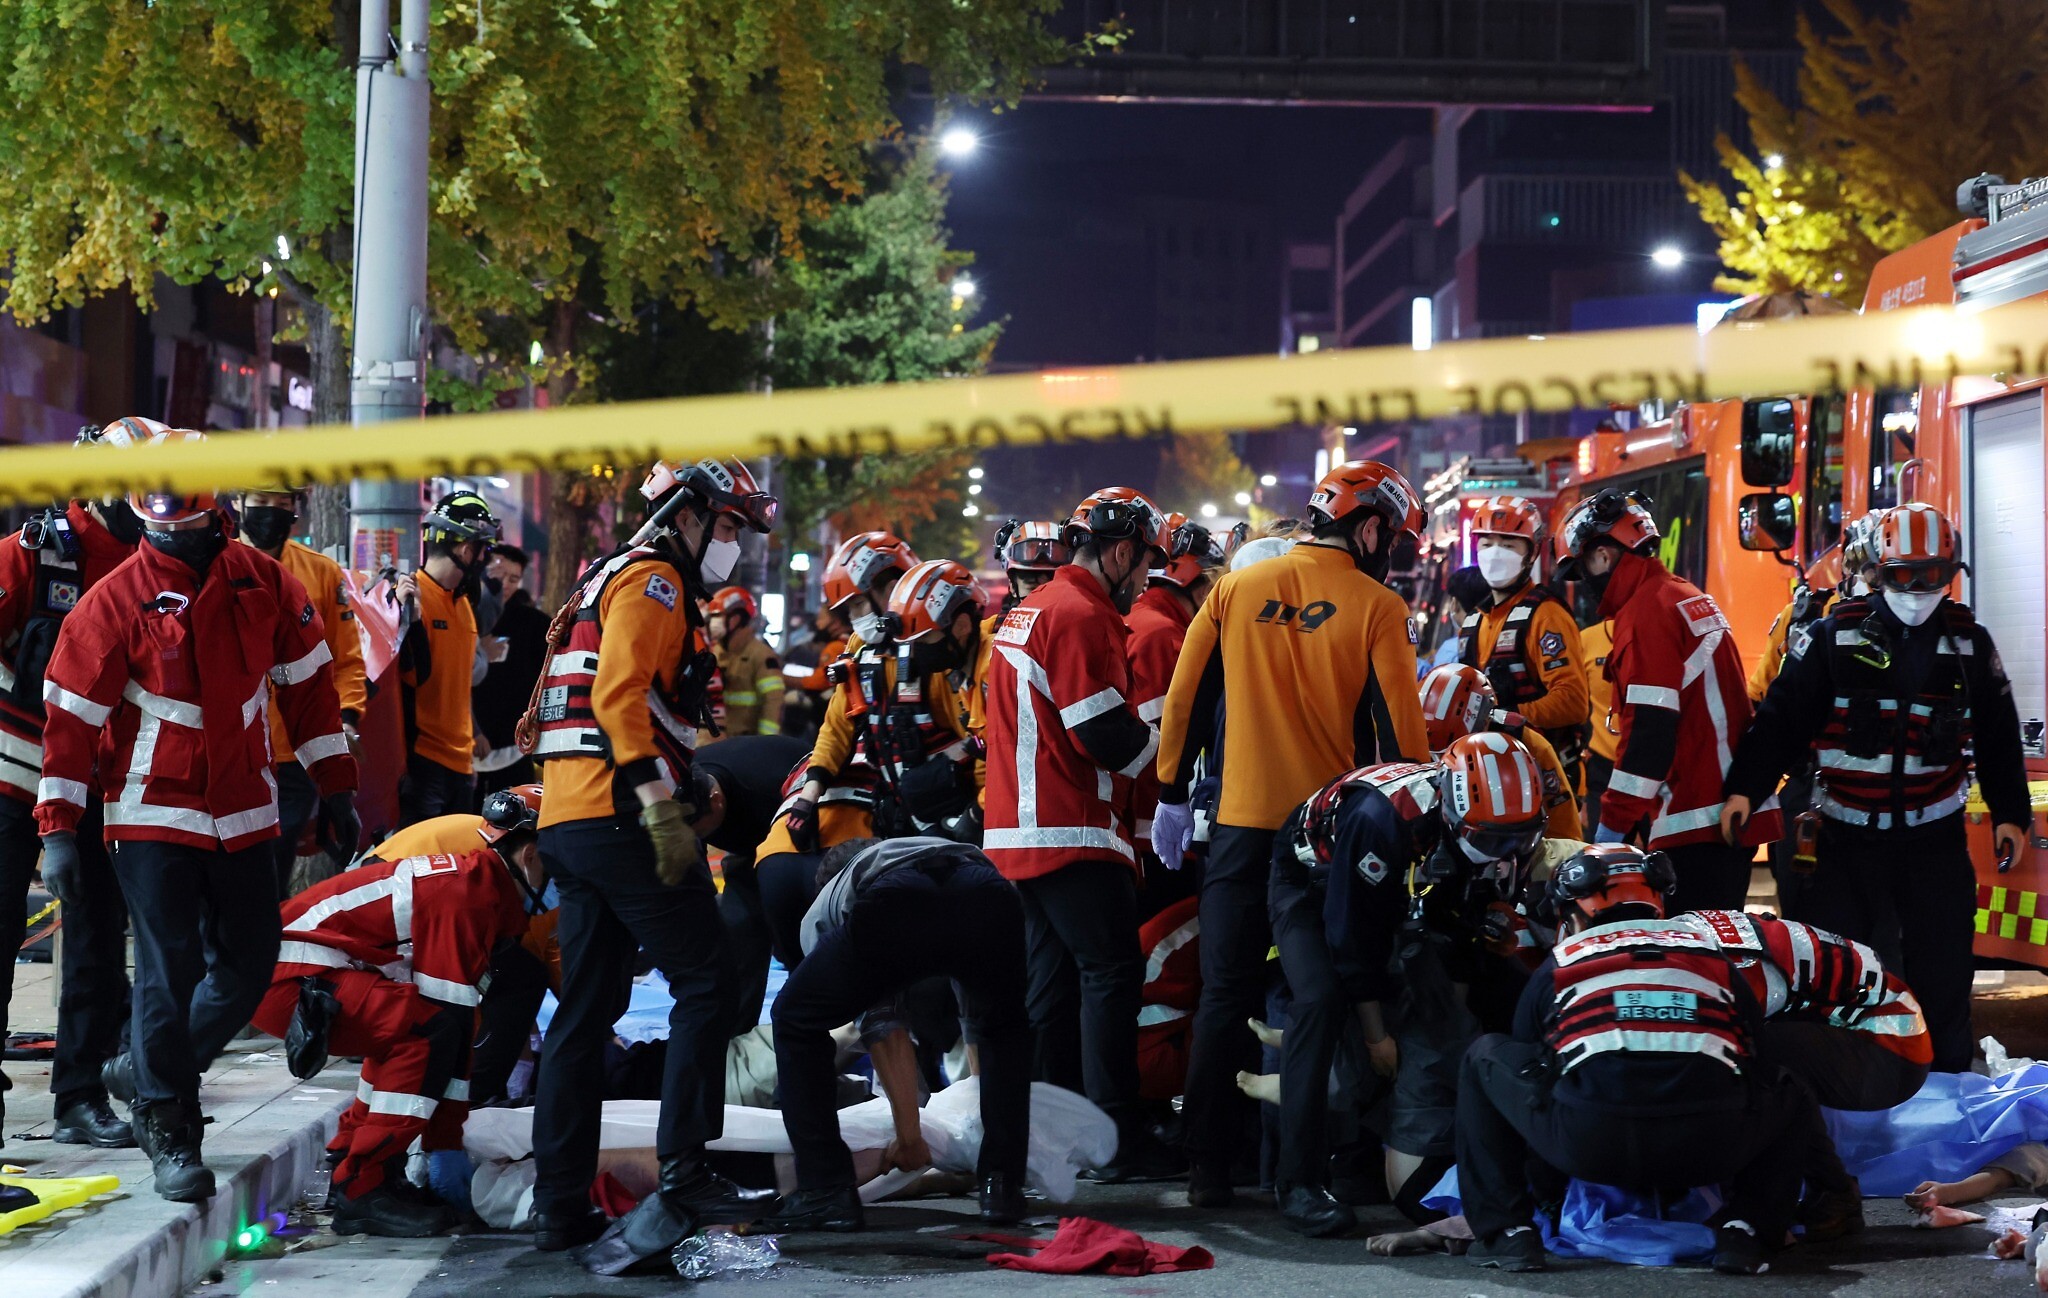 At least 151 dead after Halloween crowd surge on narrow street in Seoul |  The Times of Israel